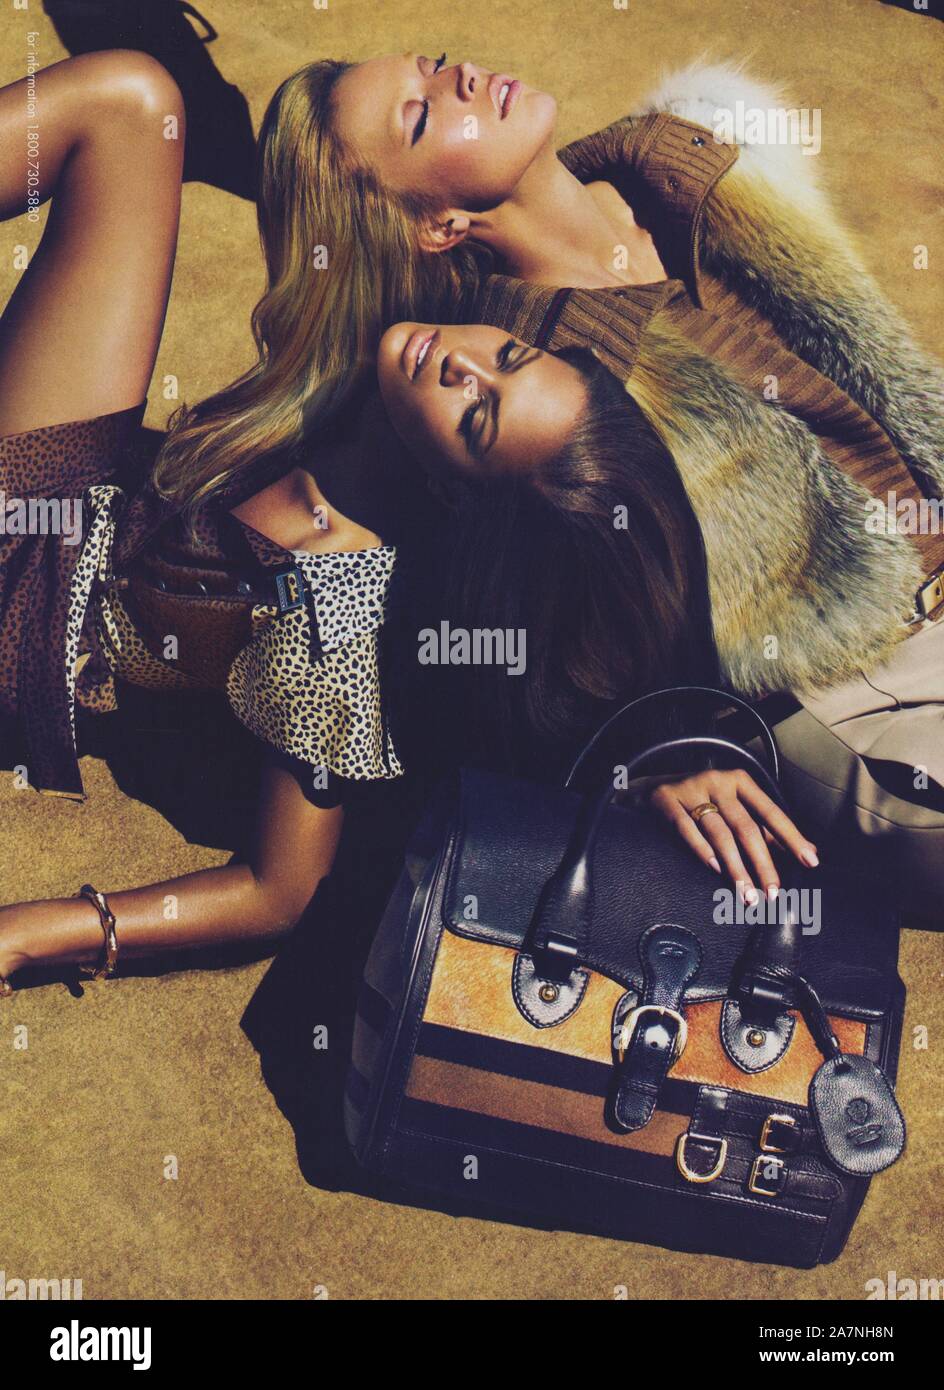 poster advertising GUCCI fashion house with Joan Smalls, Raquel Zimmerman in paper magazine from 2010 year, advertisement, creative GUCCI 2010s advert Stock Photo